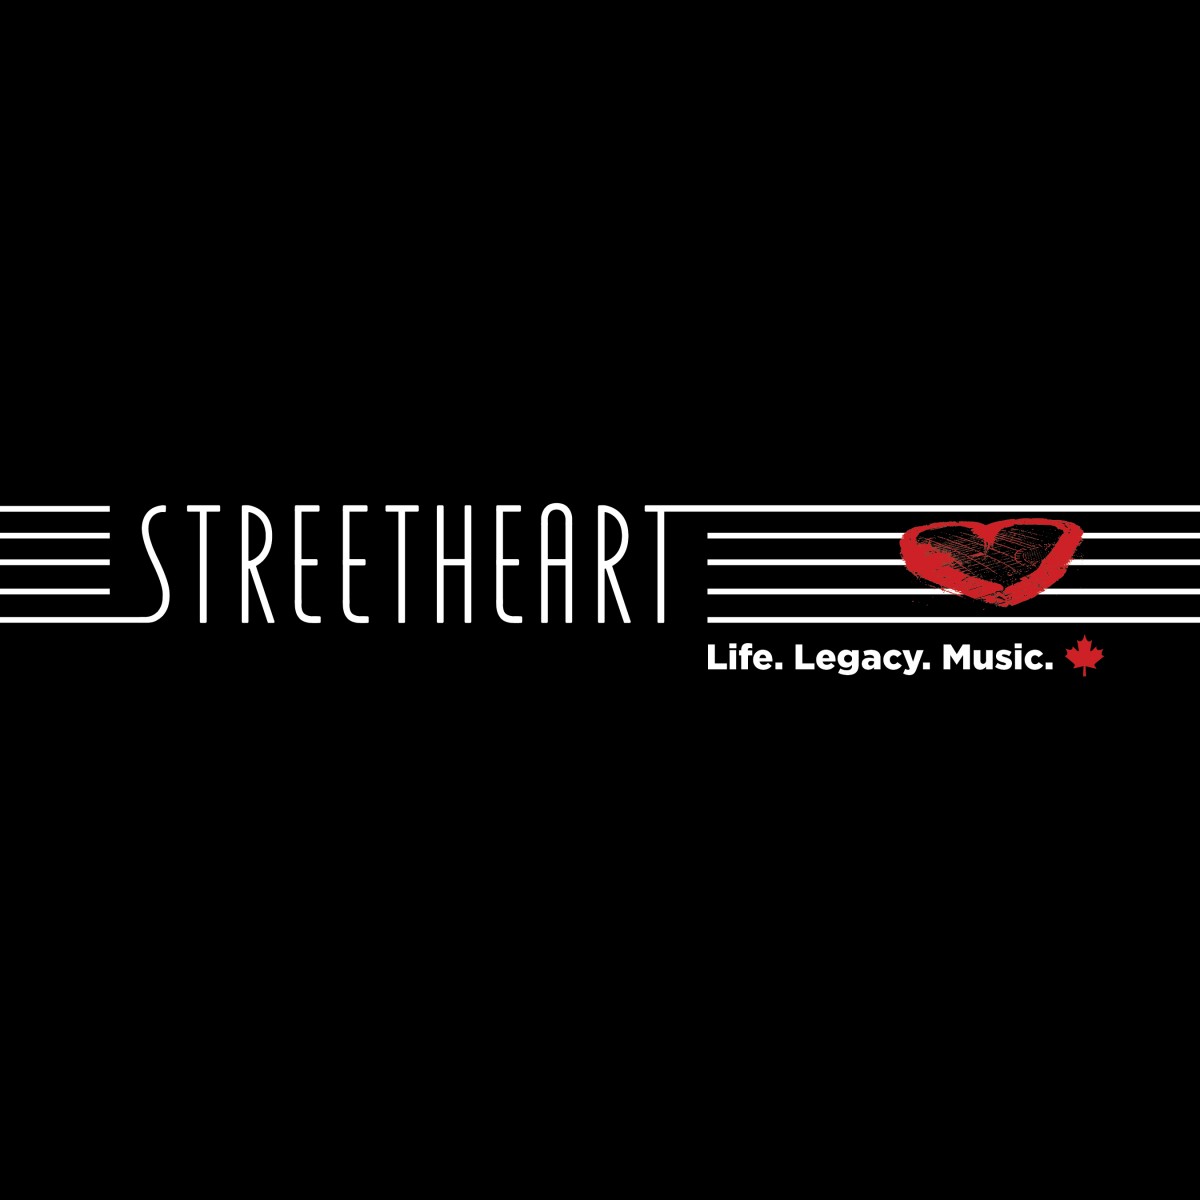 For Streetheart The Legacy Continues